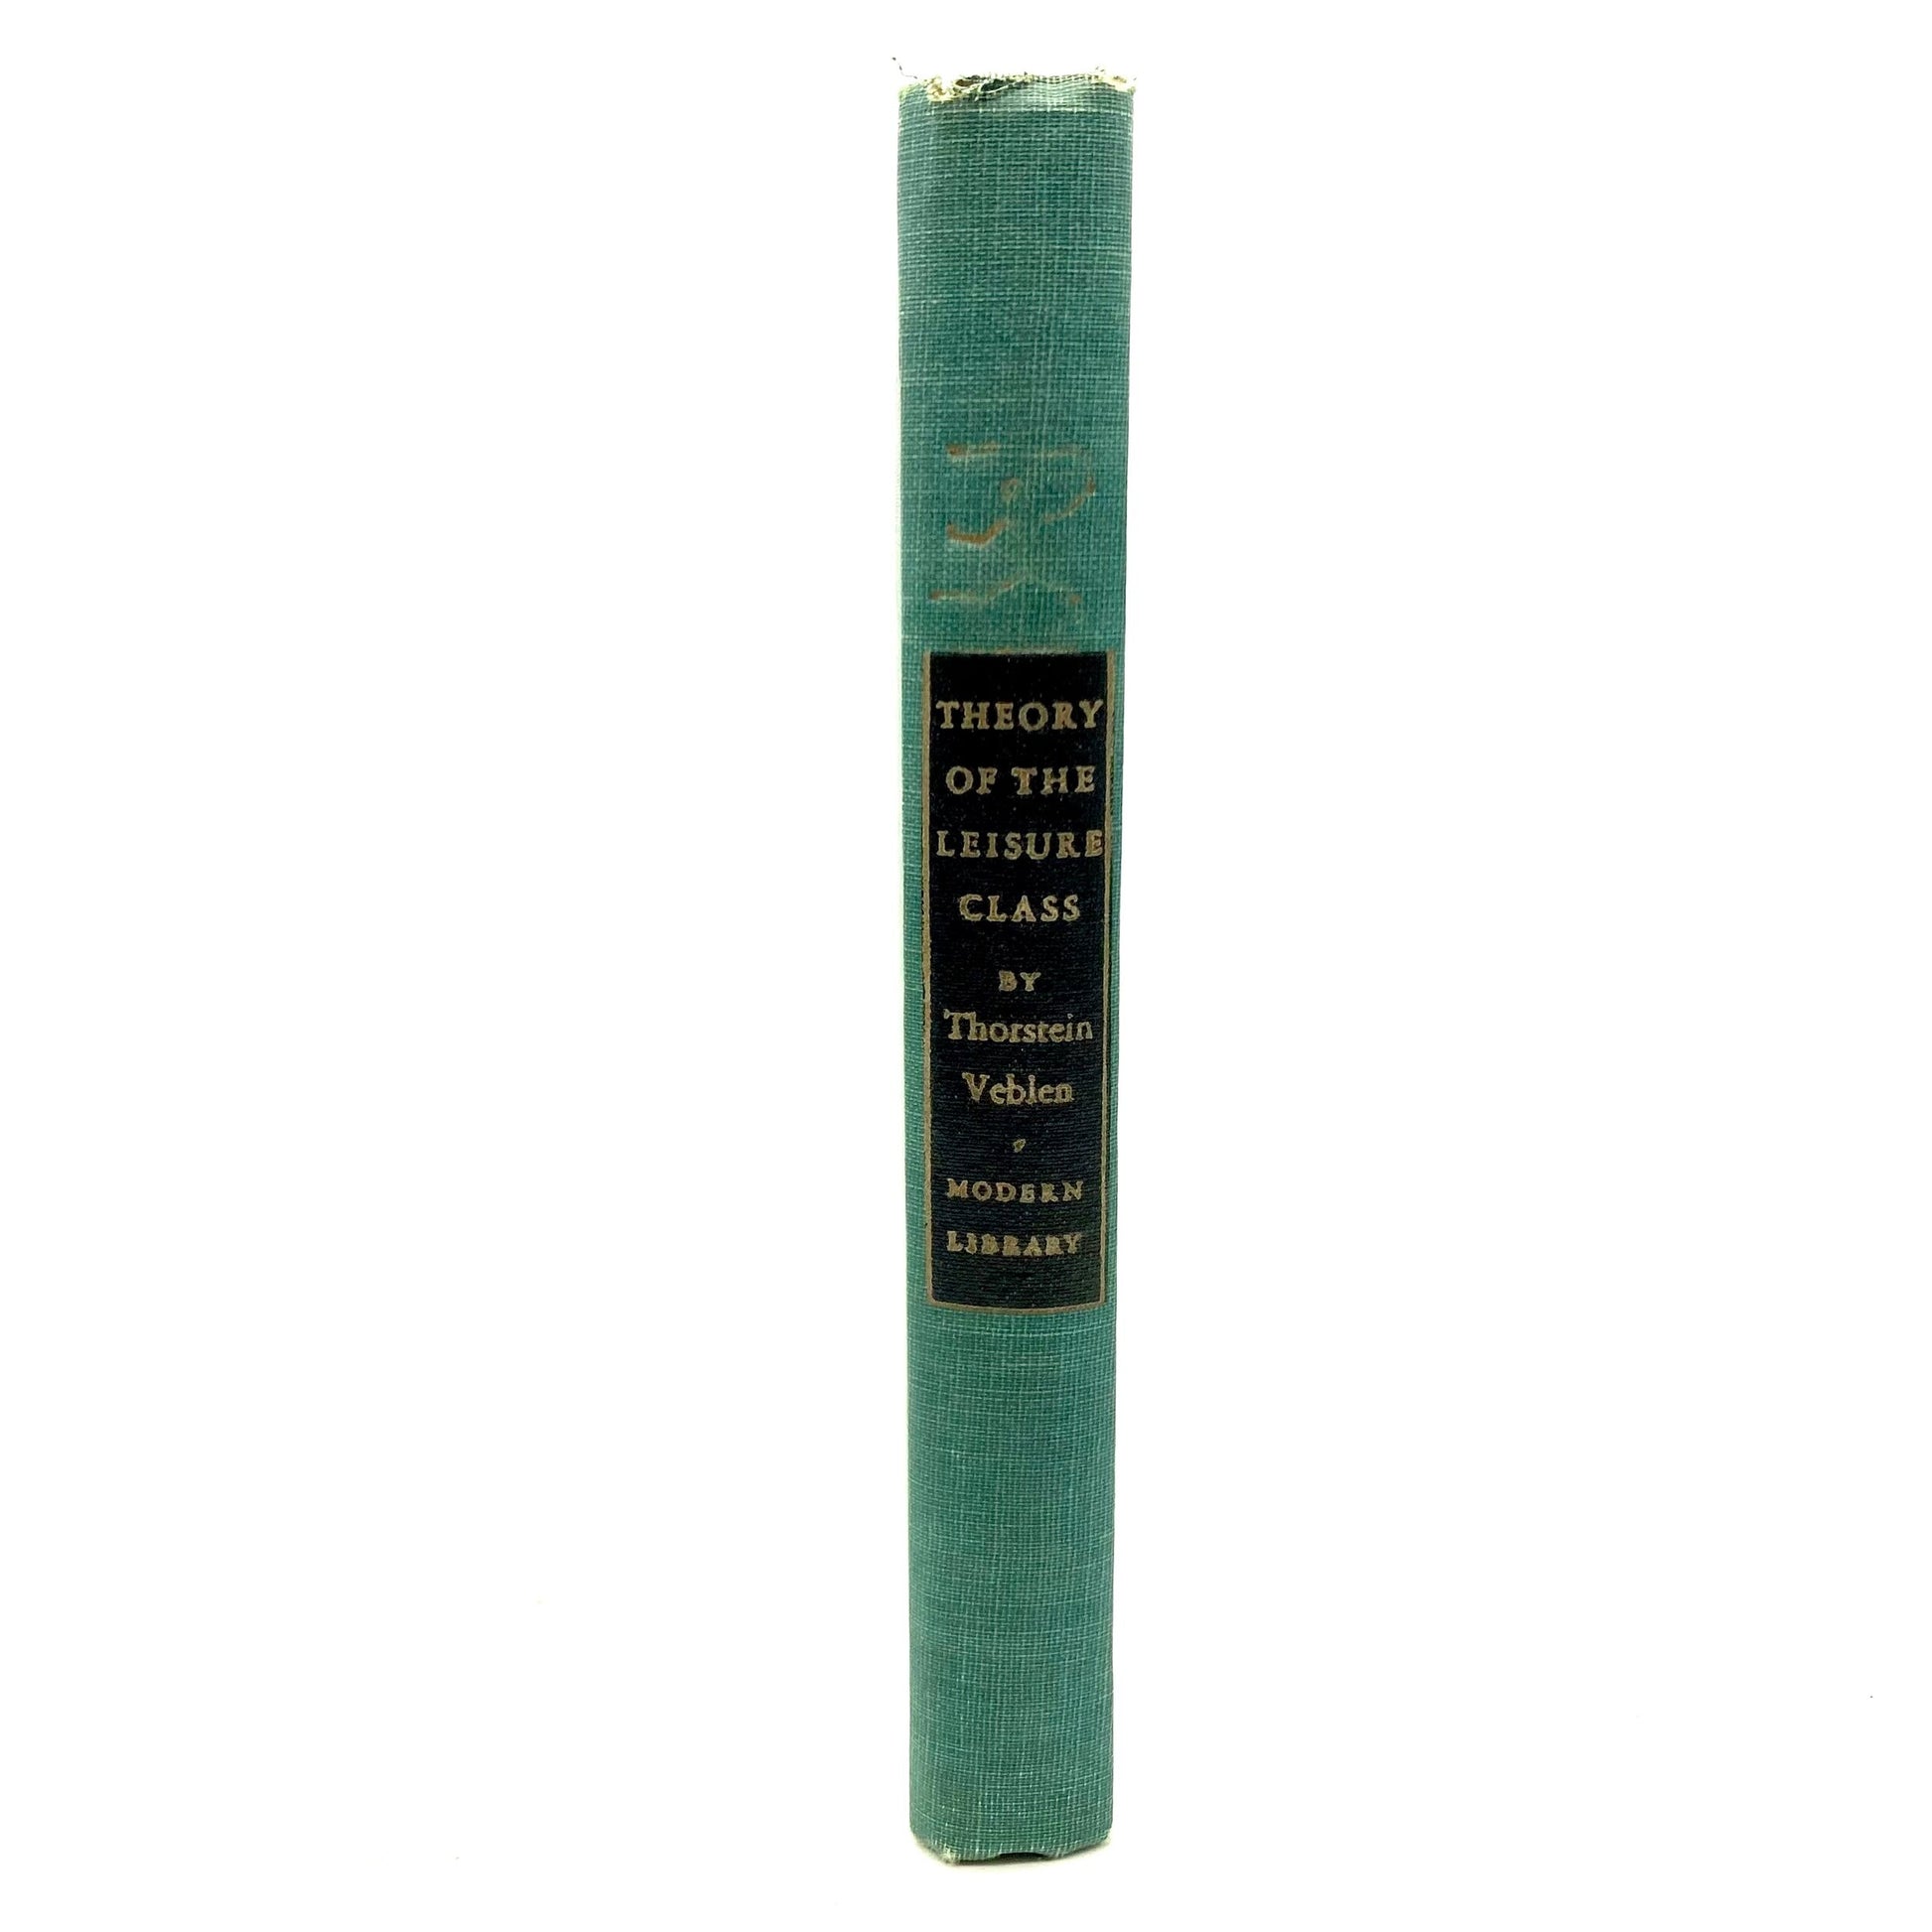 VEBLEN, Thorstein "The Theory of the Leisure Class" [Modern Library, 1934] - Buzz Bookstore